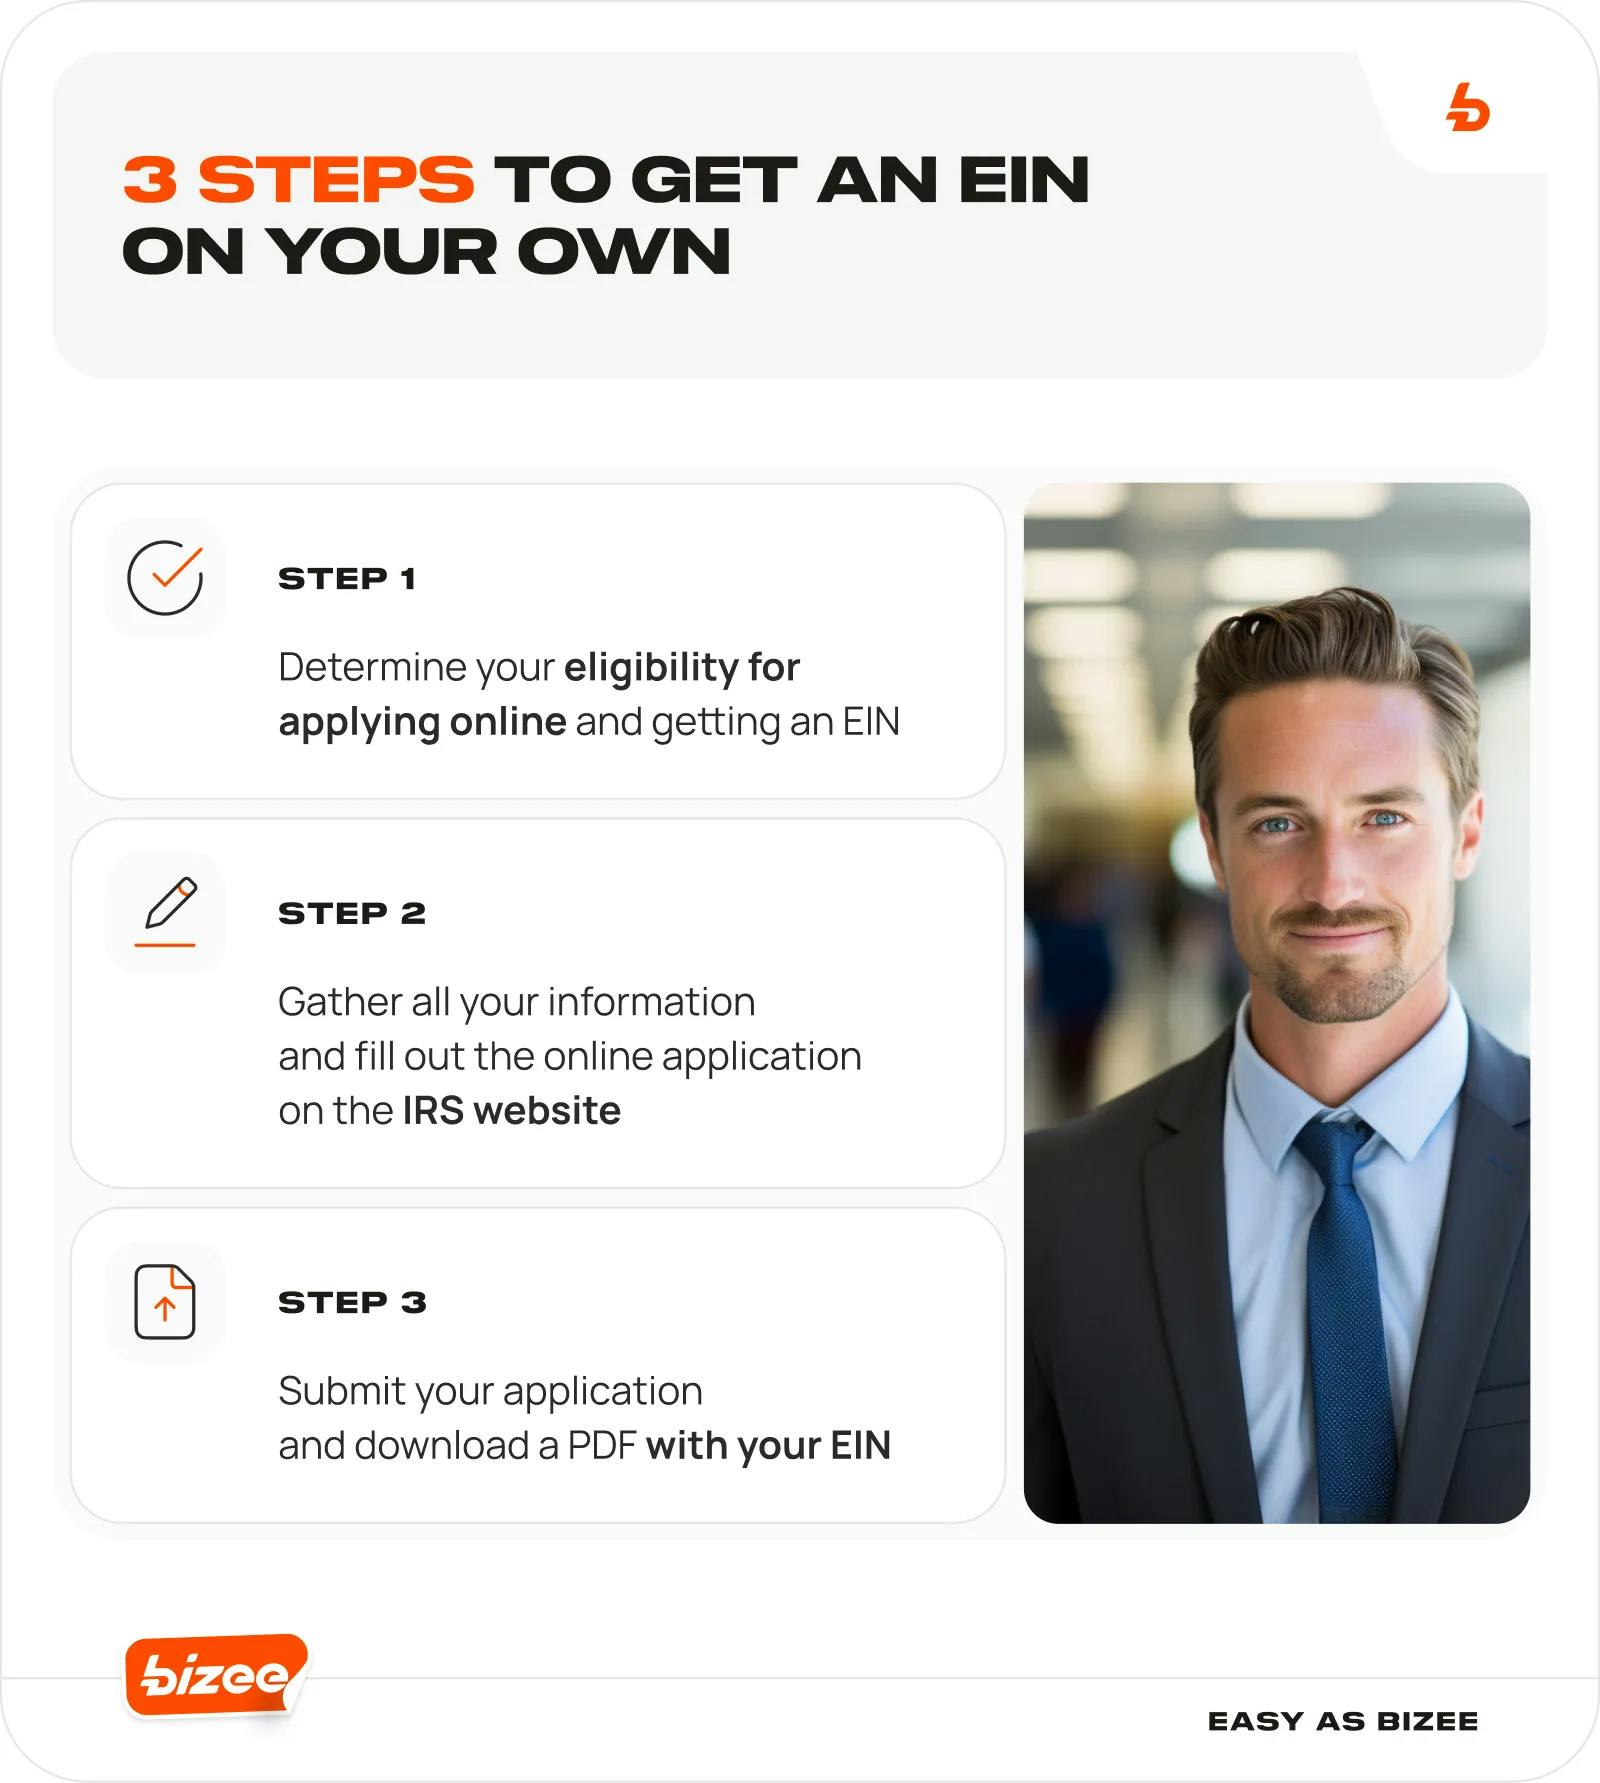 Steps to Get an EIN on Your Own